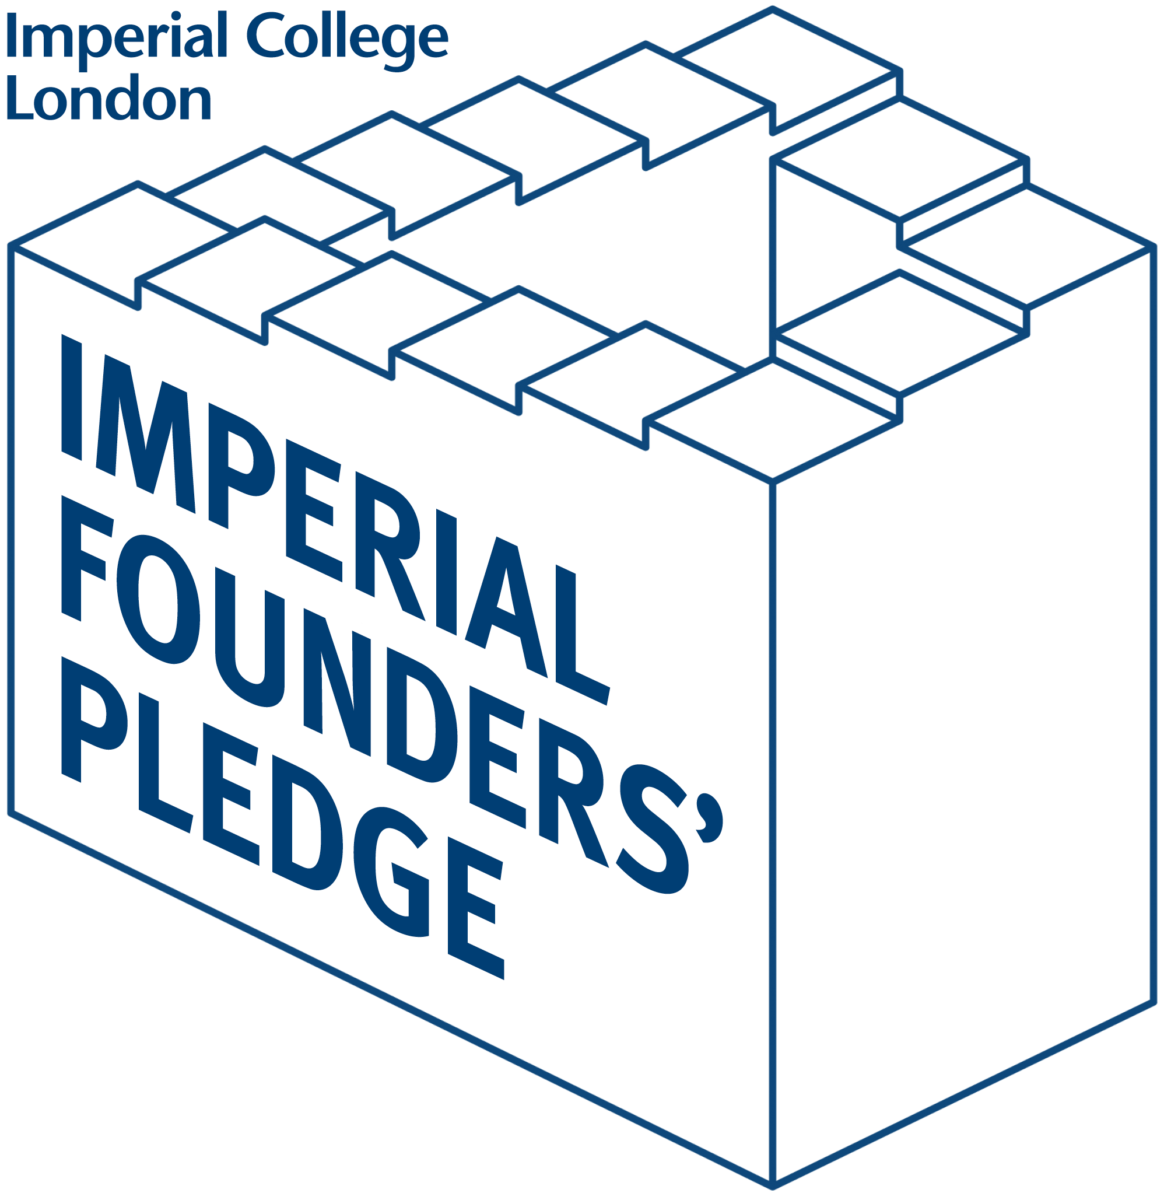 Imperial College London's Founders' Pledge logo